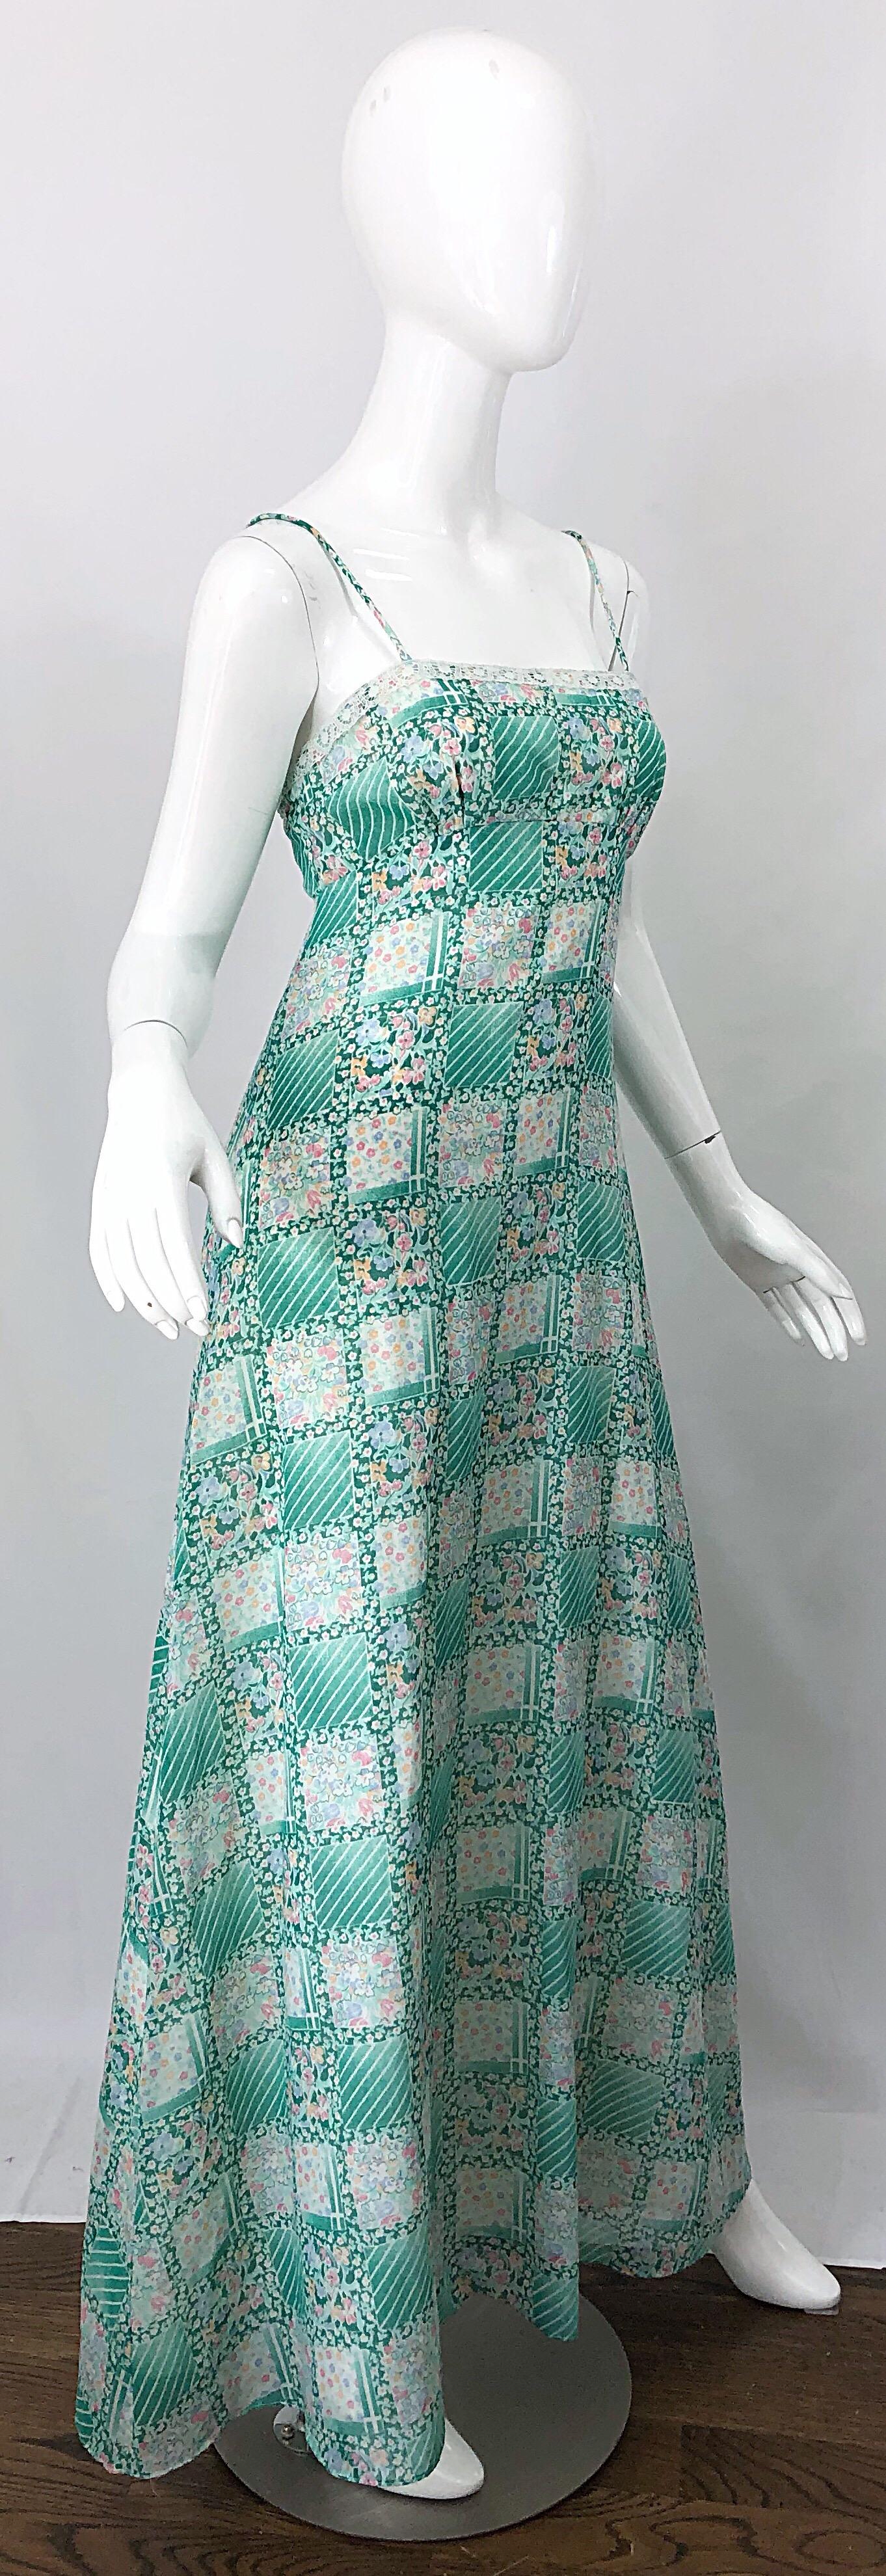 1970s Teal Green Blue Pink Flower Printed Cotton + Lace Vintage 70s Maxi Dress In Excellent Condition For Sale In San Diego, CA